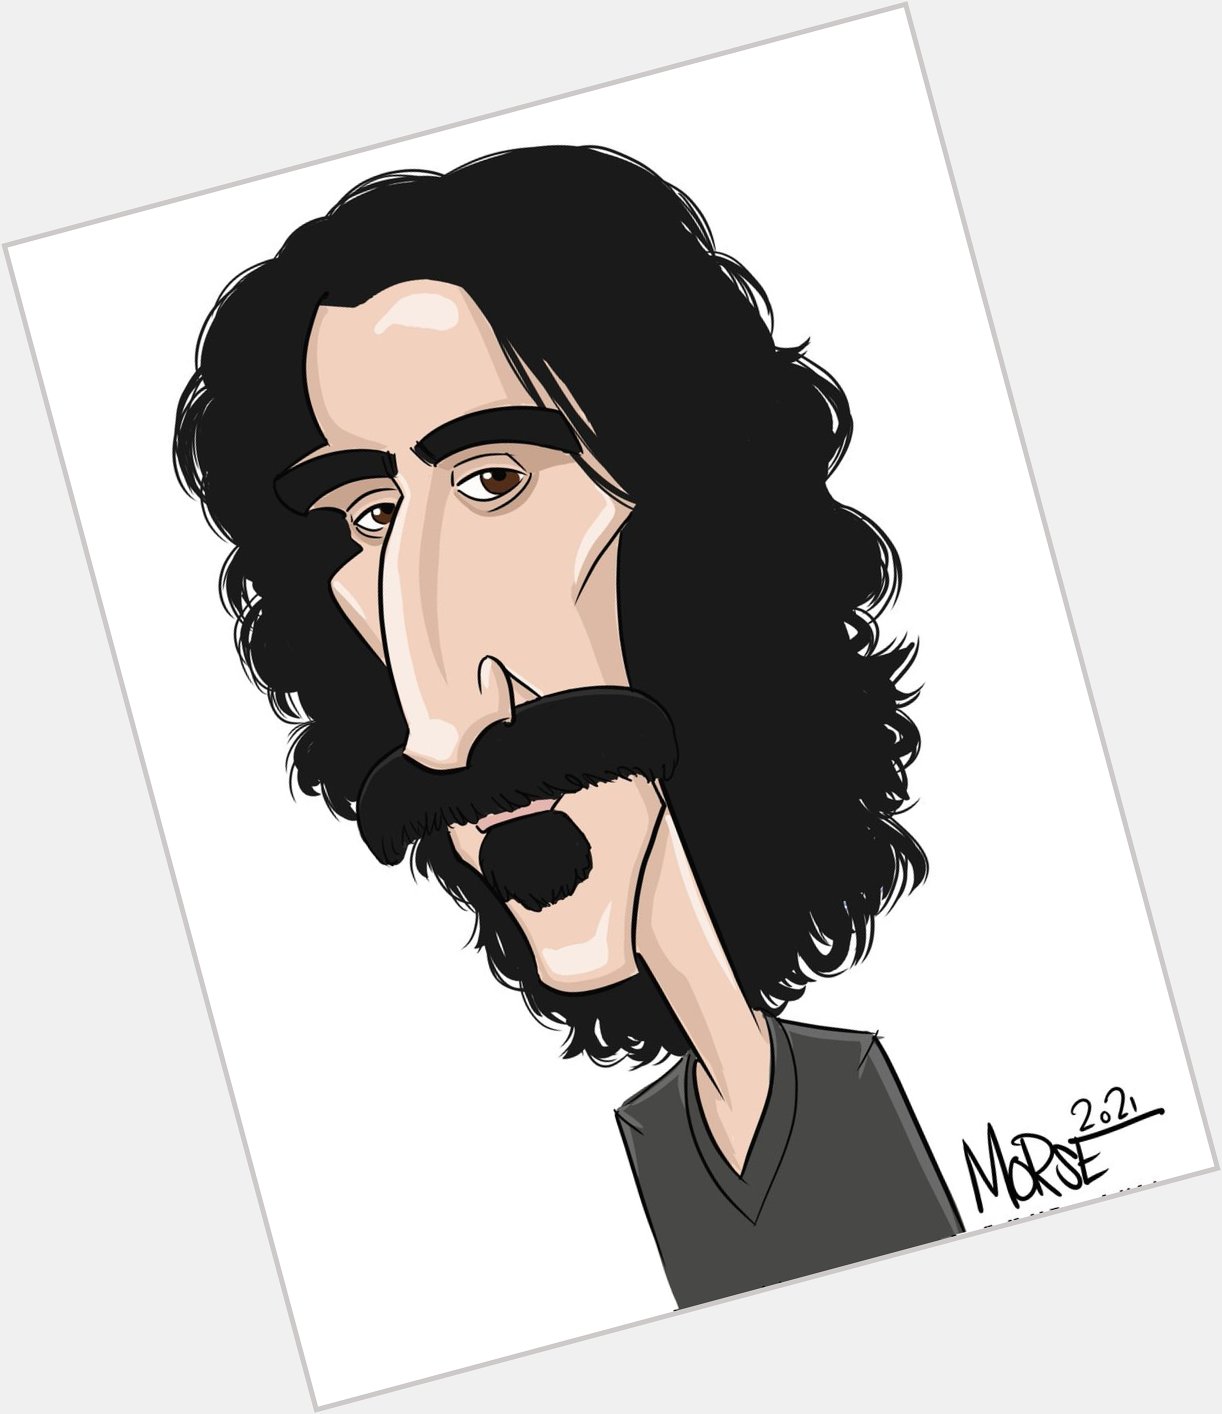 Happy Birthday to Frank Zappa! Hey, stop Sheiking Yerbouti and message me about getting a caricature! 